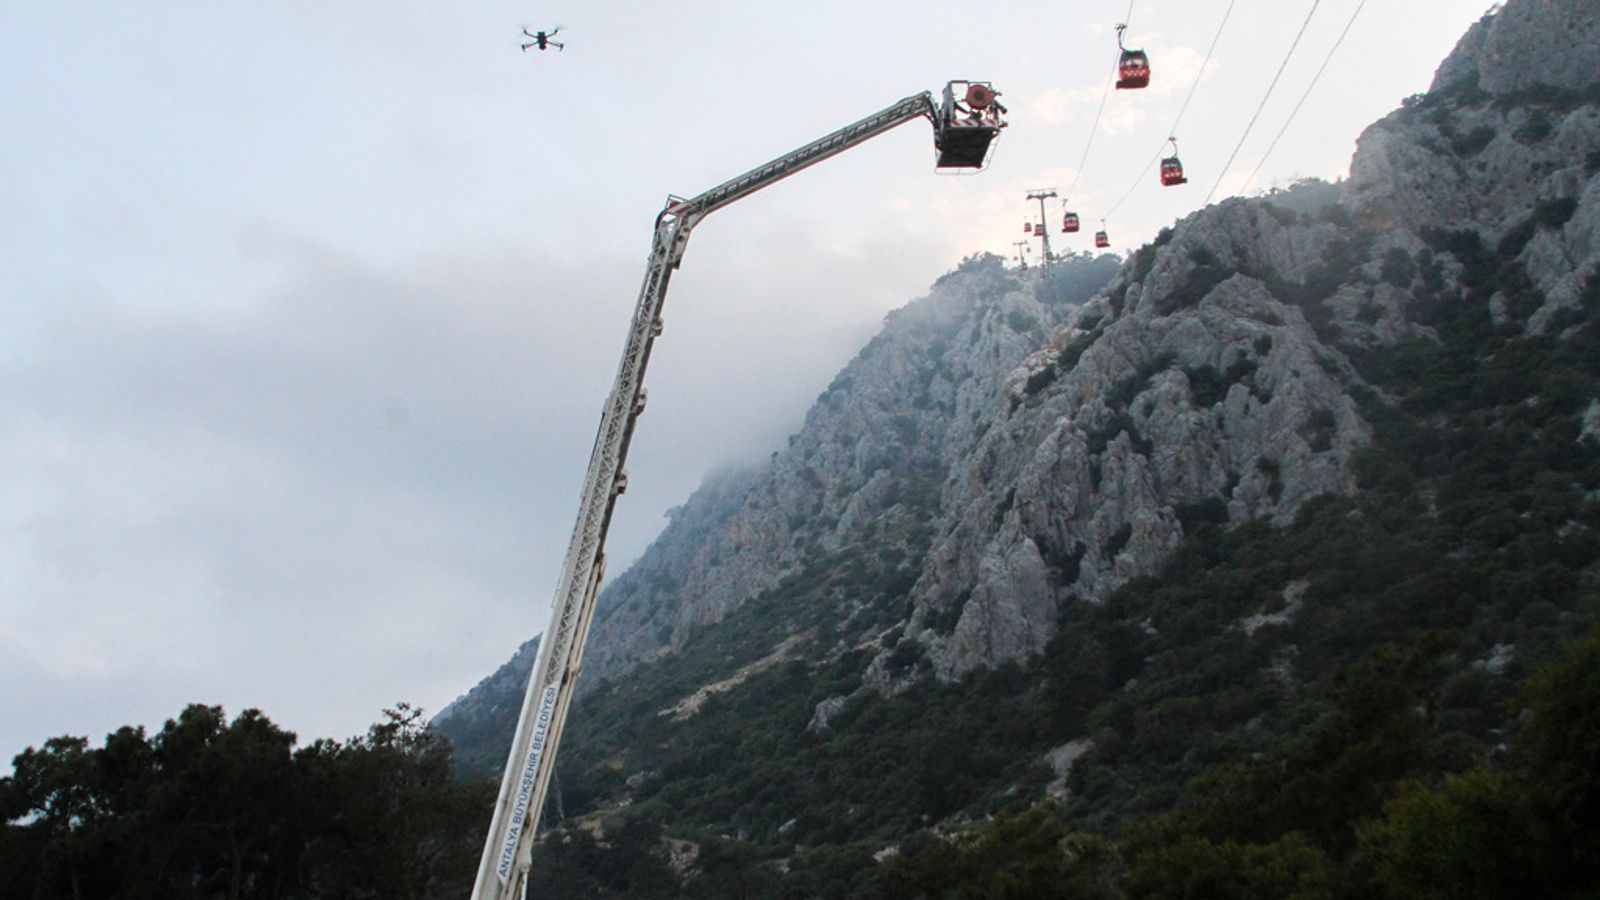 Cable car collision leaves one dead, 10 injured and hundreds stranded mid-air in Turkey